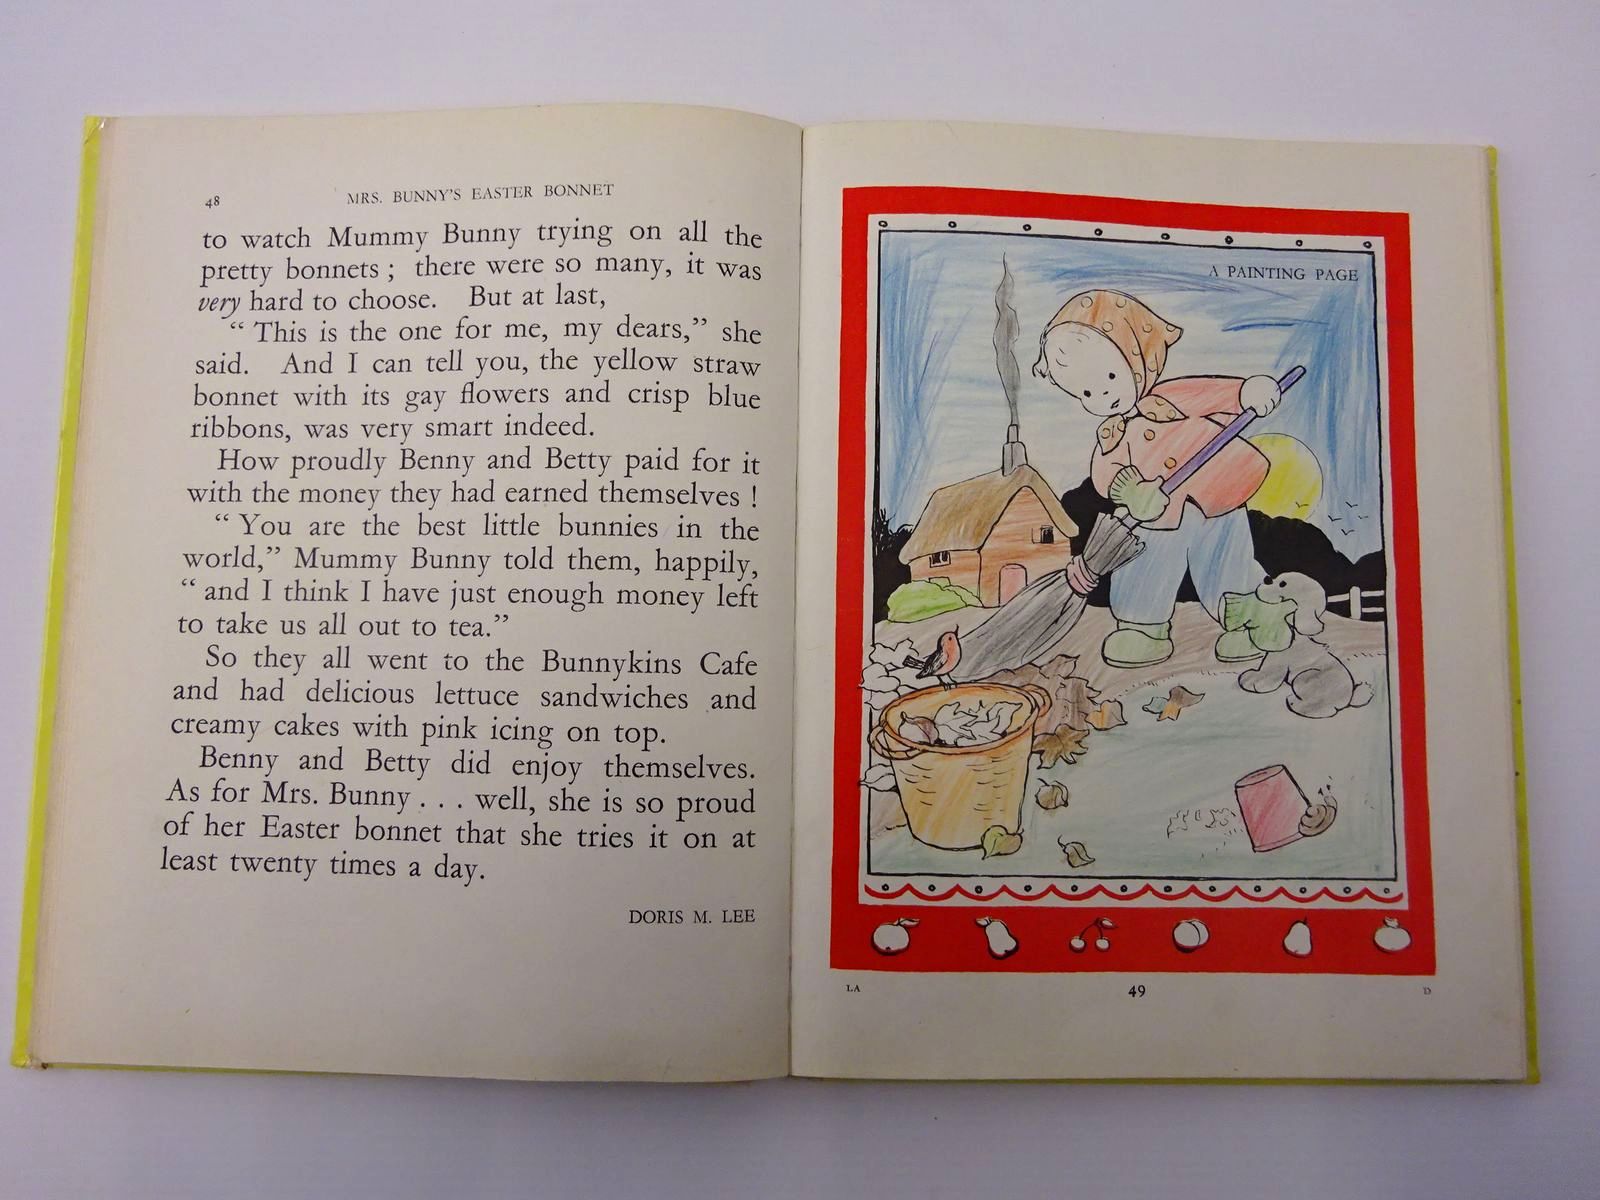 Photo of LUCIE ATTWELL'S ANNUAL 1953 illustrated by Attwell, Mabel Lucie published by Dean & Son Ltd. (STOCK CODE: 2129431)  for sale by Stella & Rose's Books